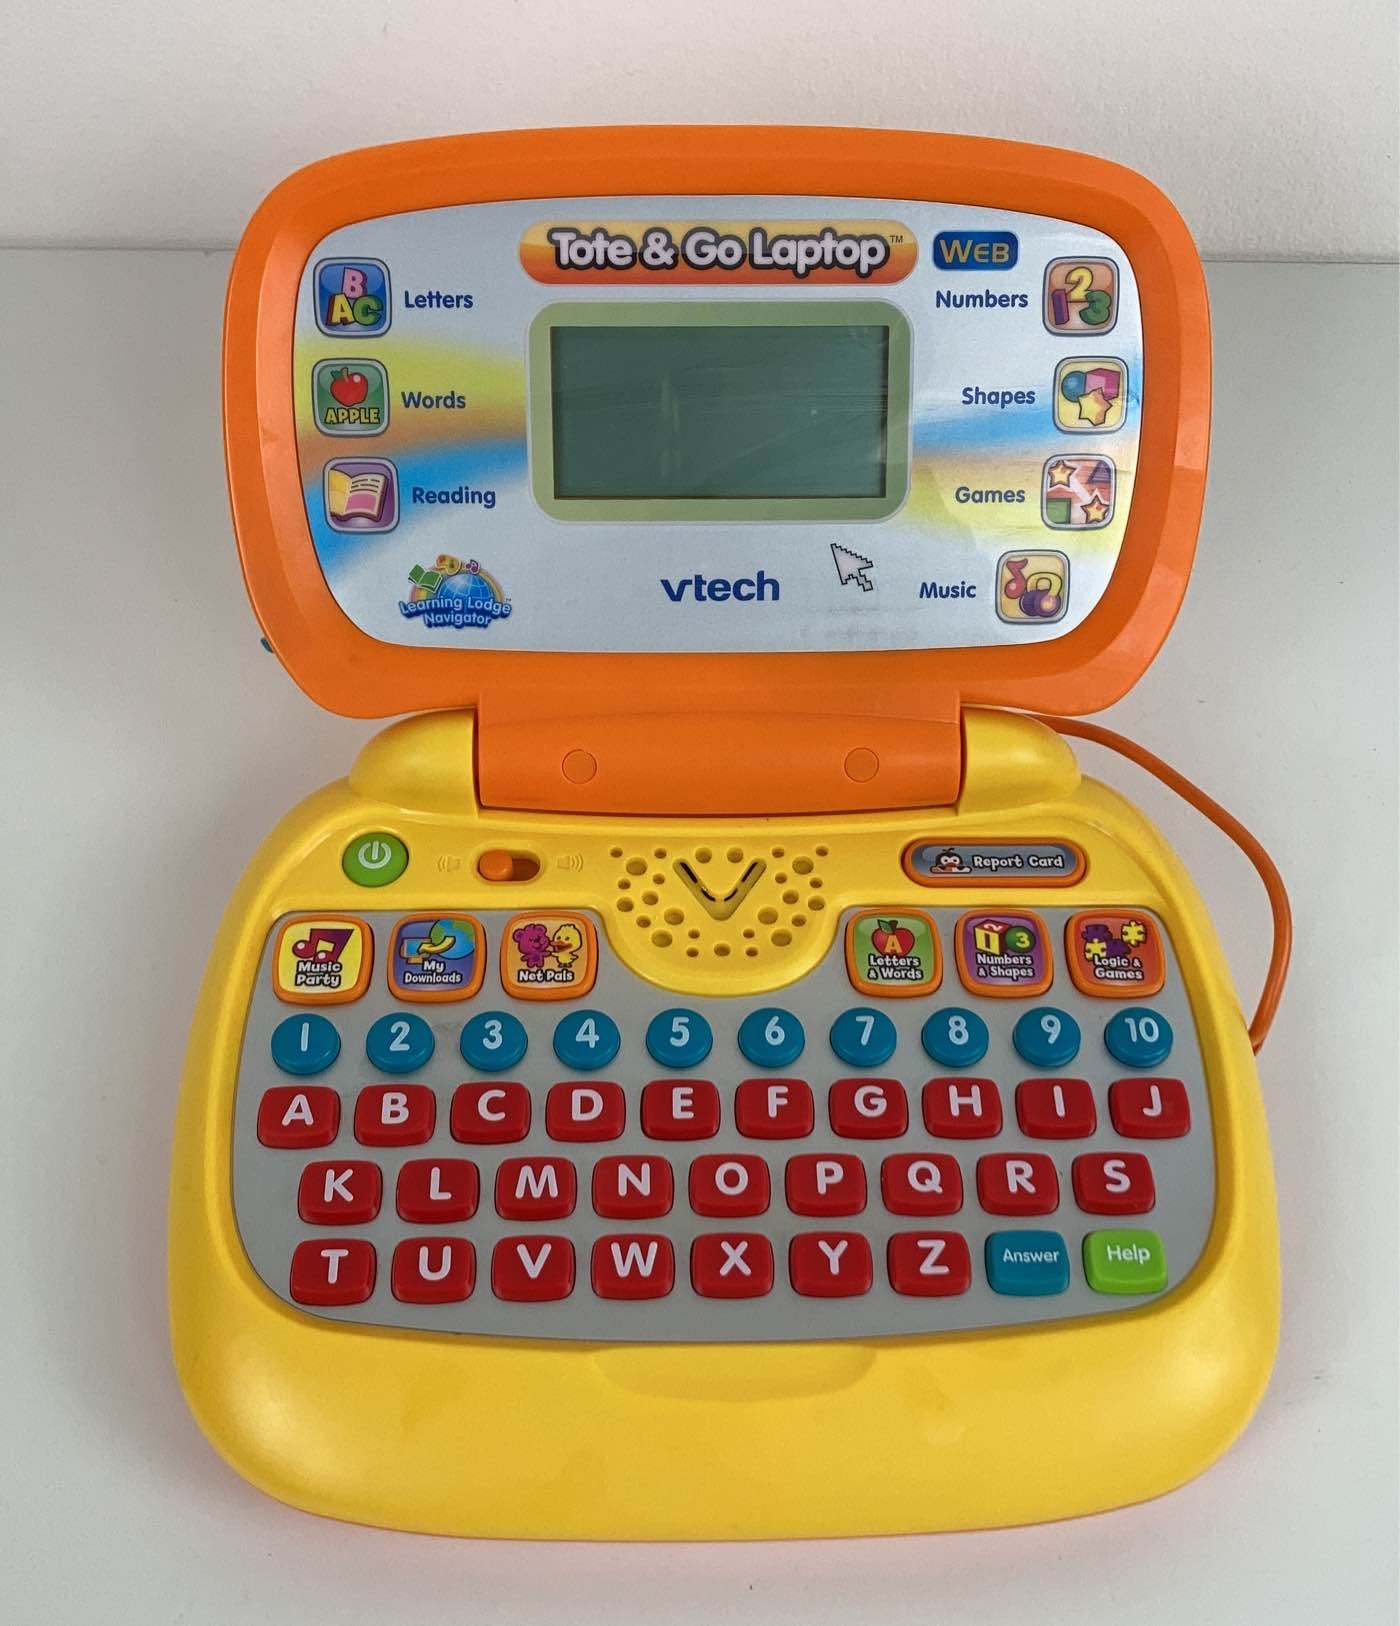 VTech Tote N Go Laptop as low as $12 Shipped (Normally $30) - The